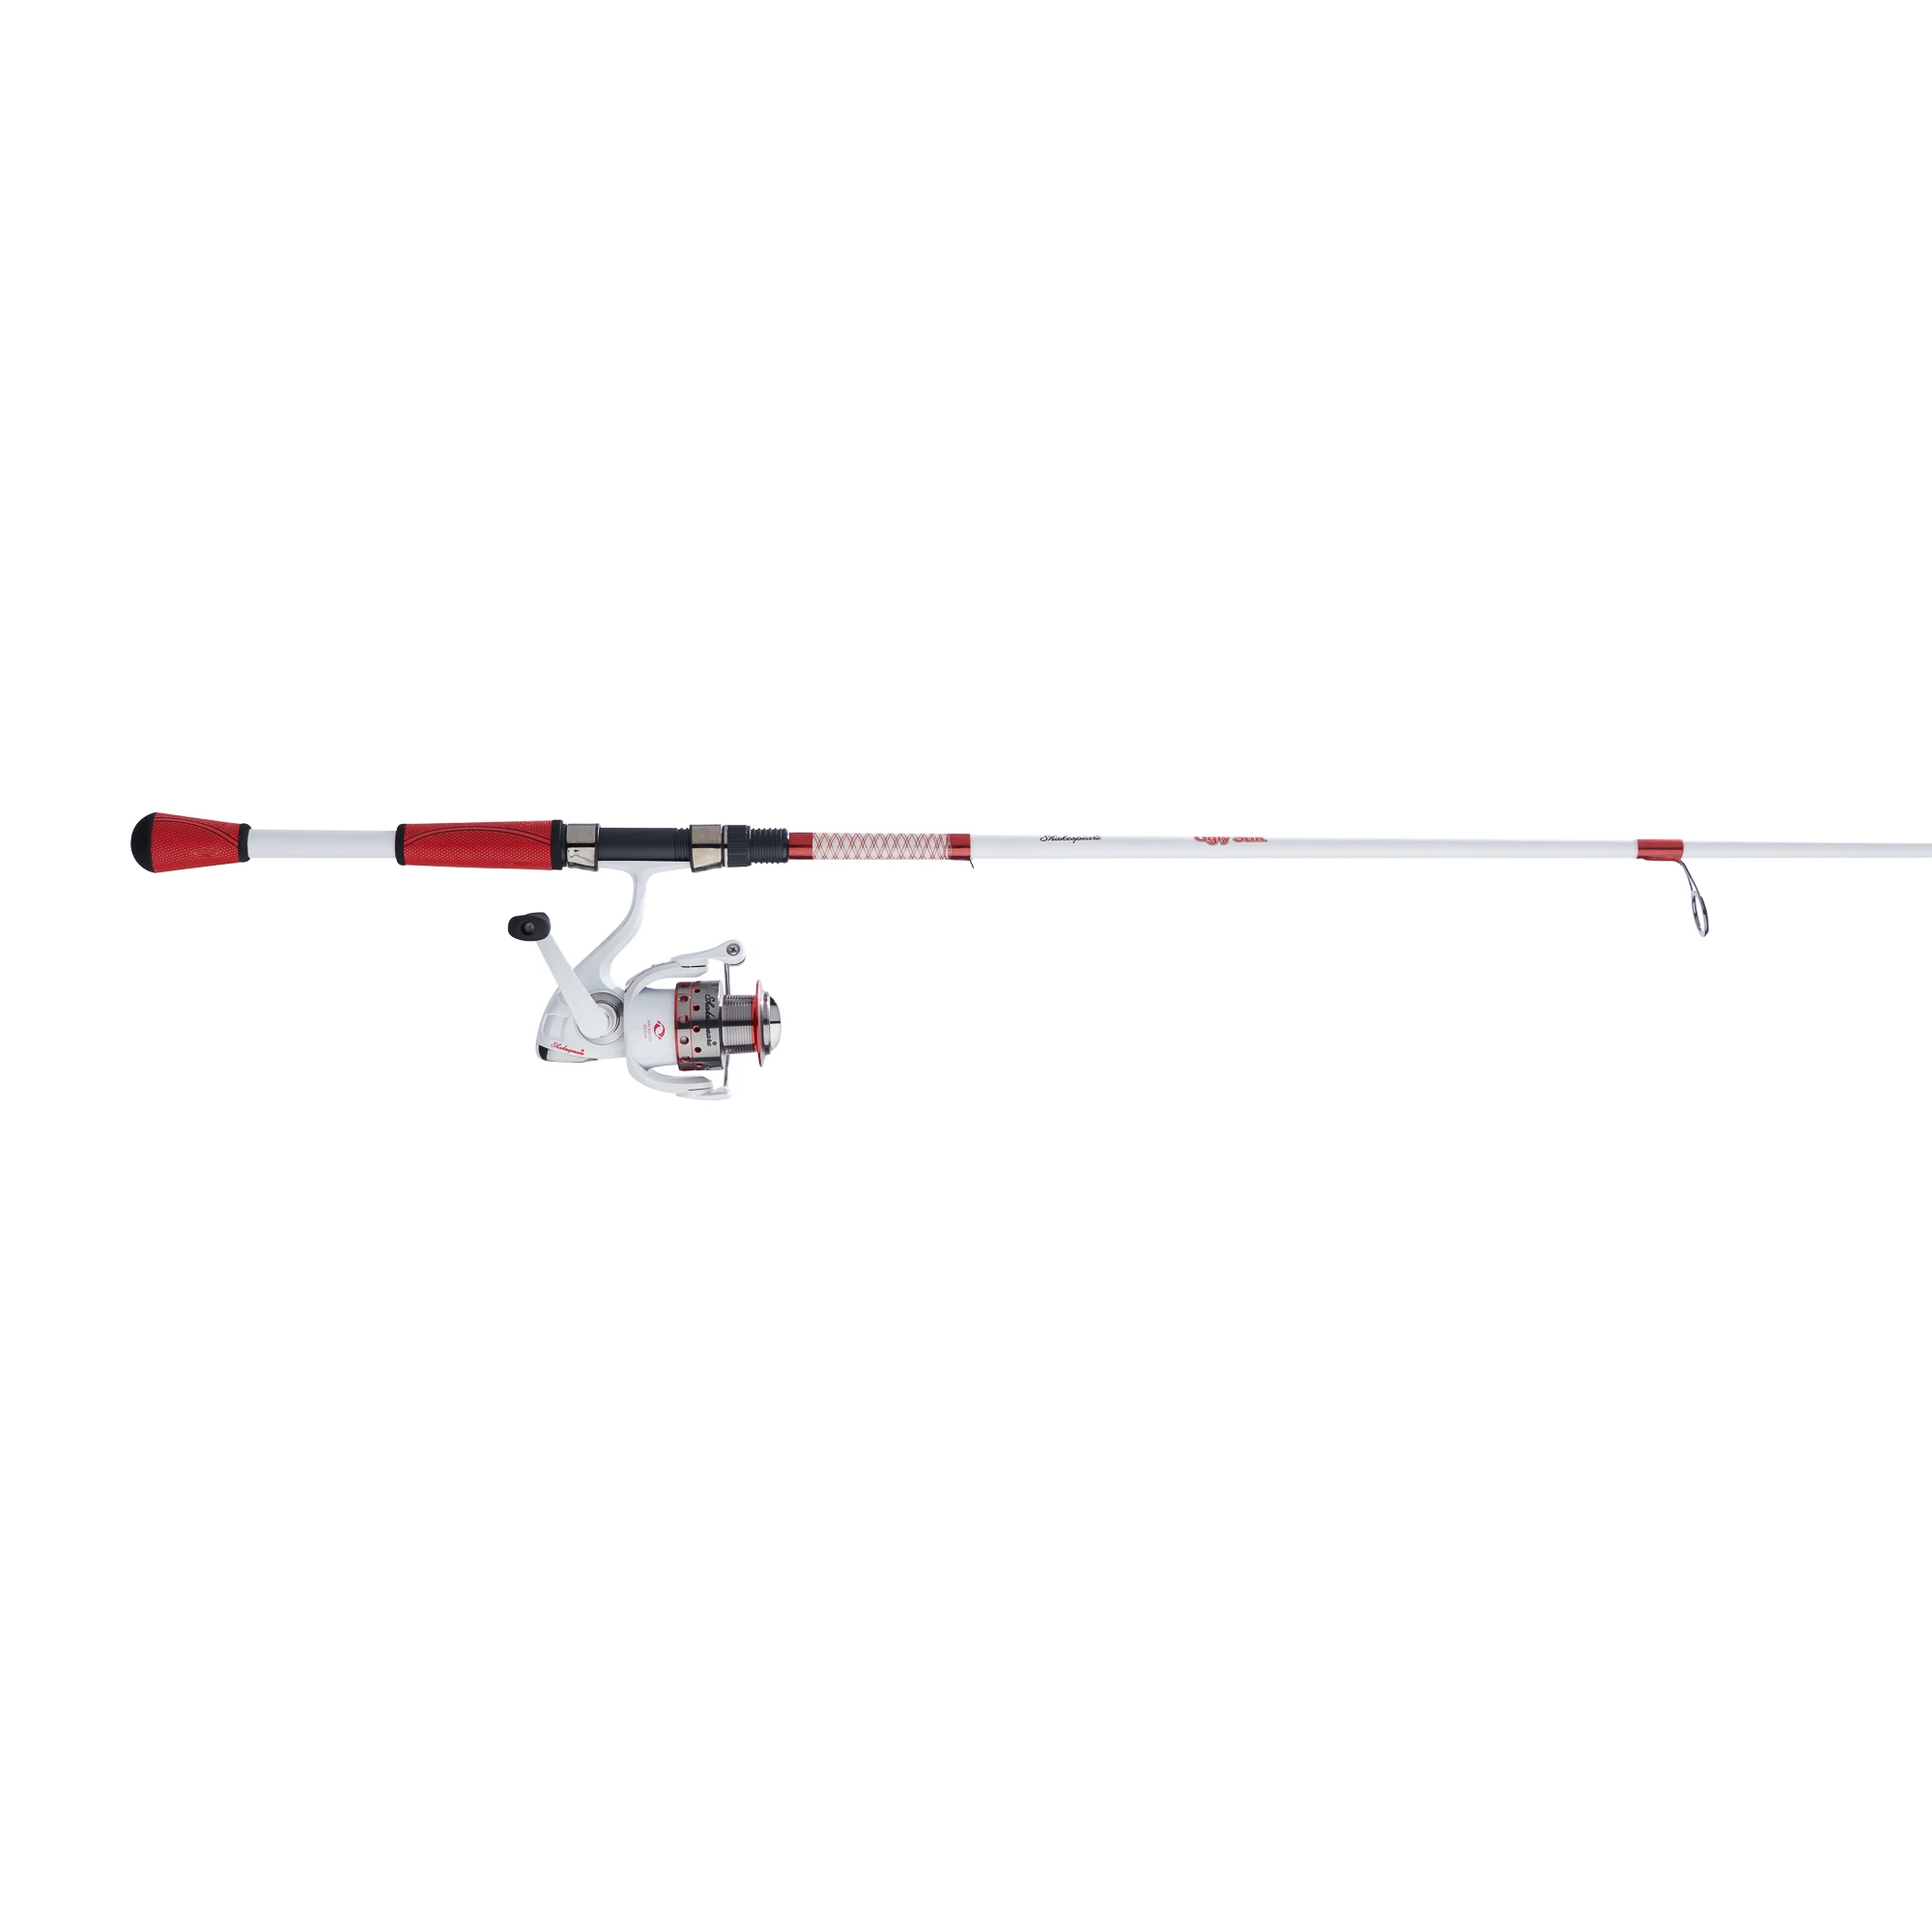 6’6” US Red White Spinning Rod and Reel Combo enlarge